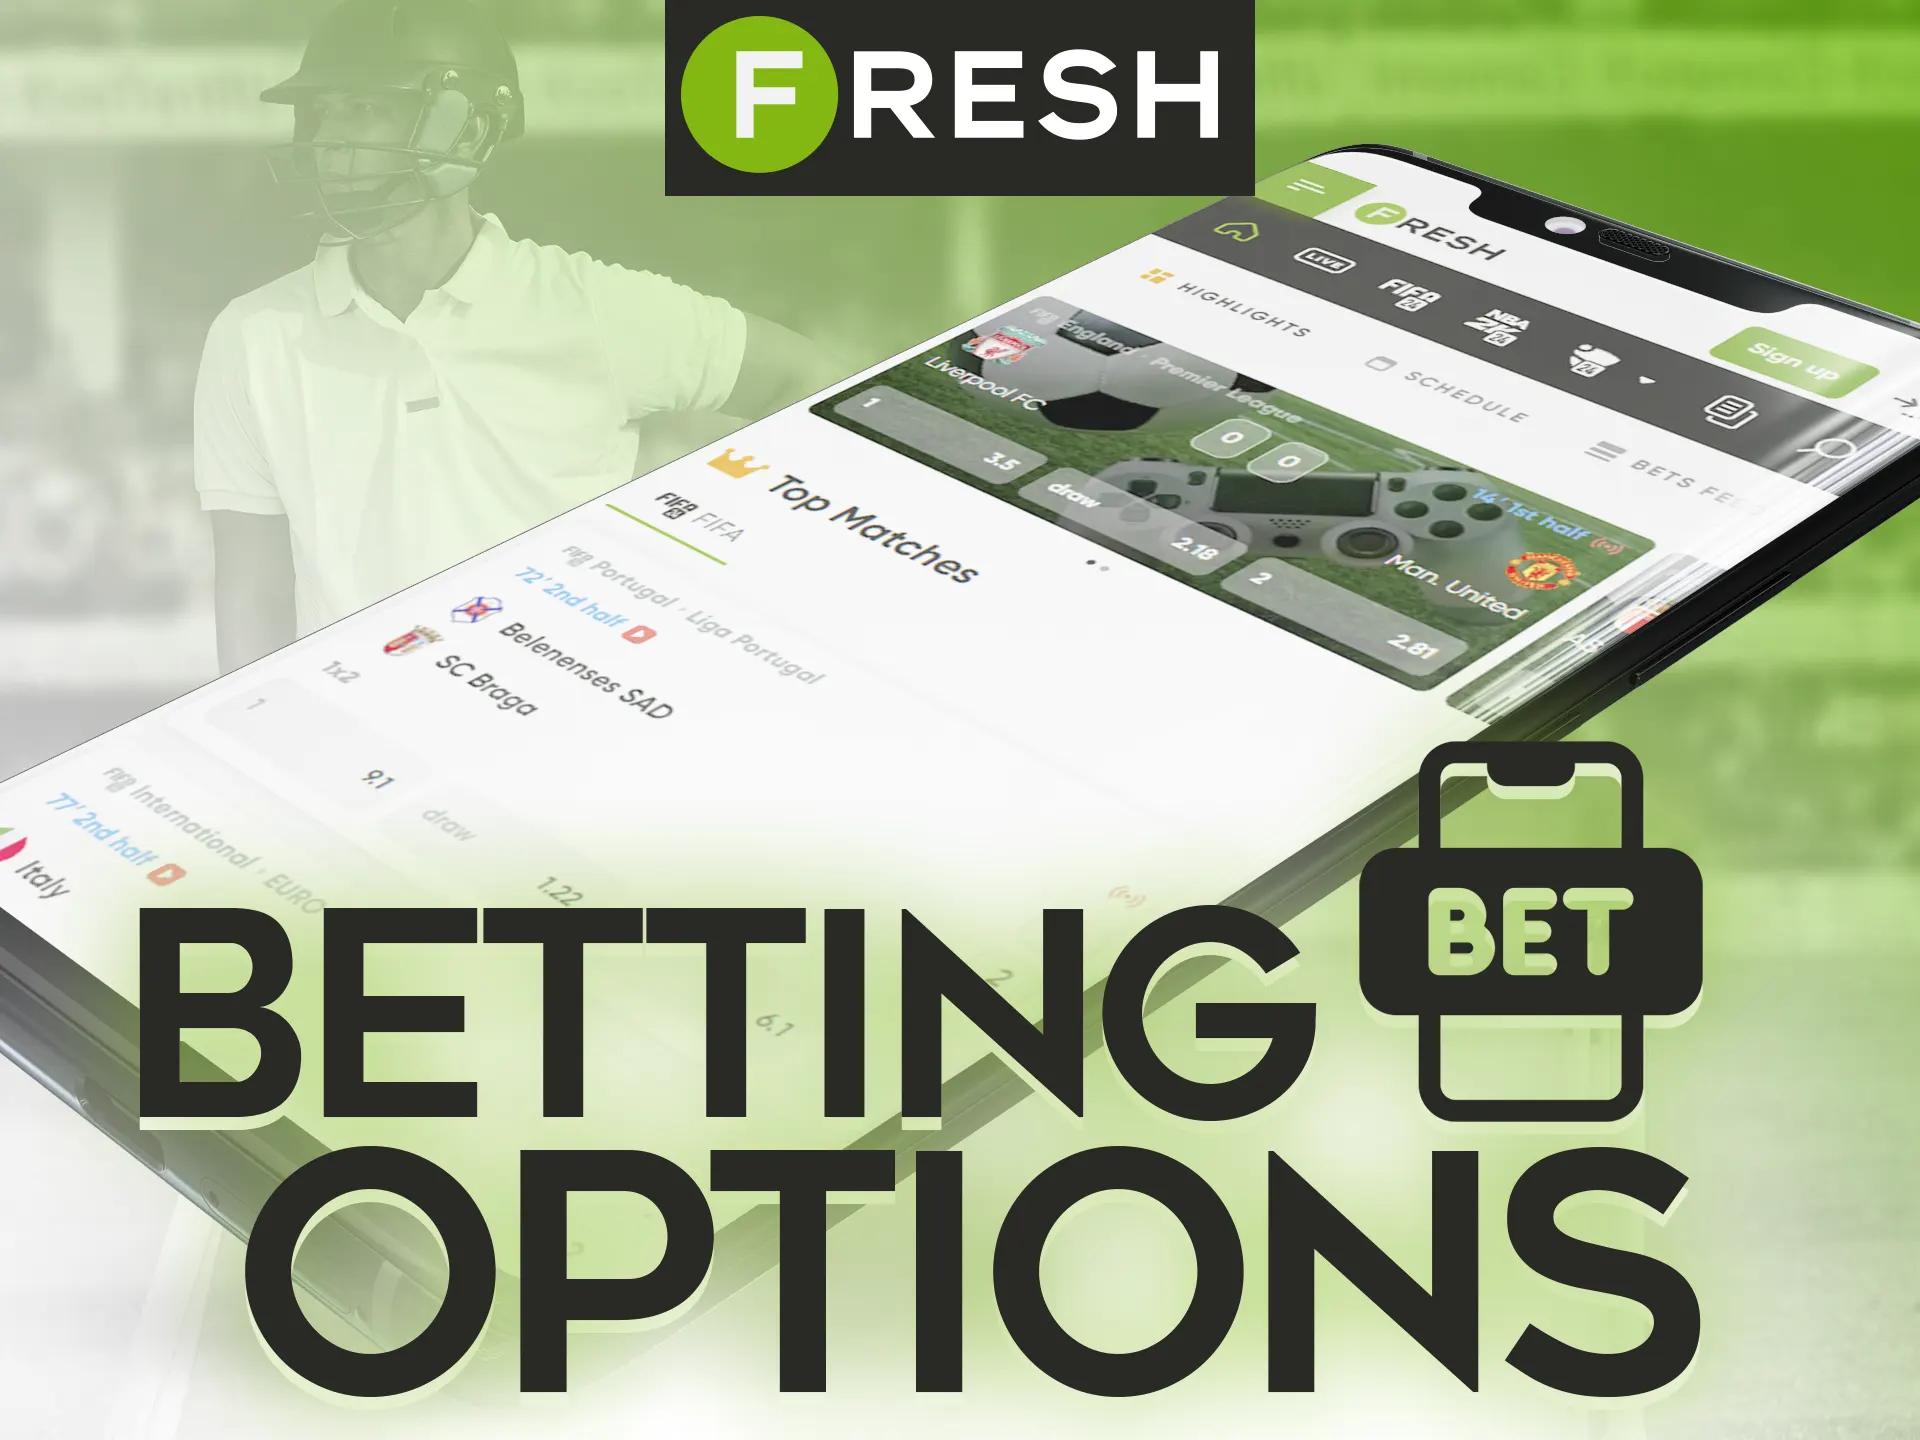 Learn more about betting options in the Fresh Casino app.